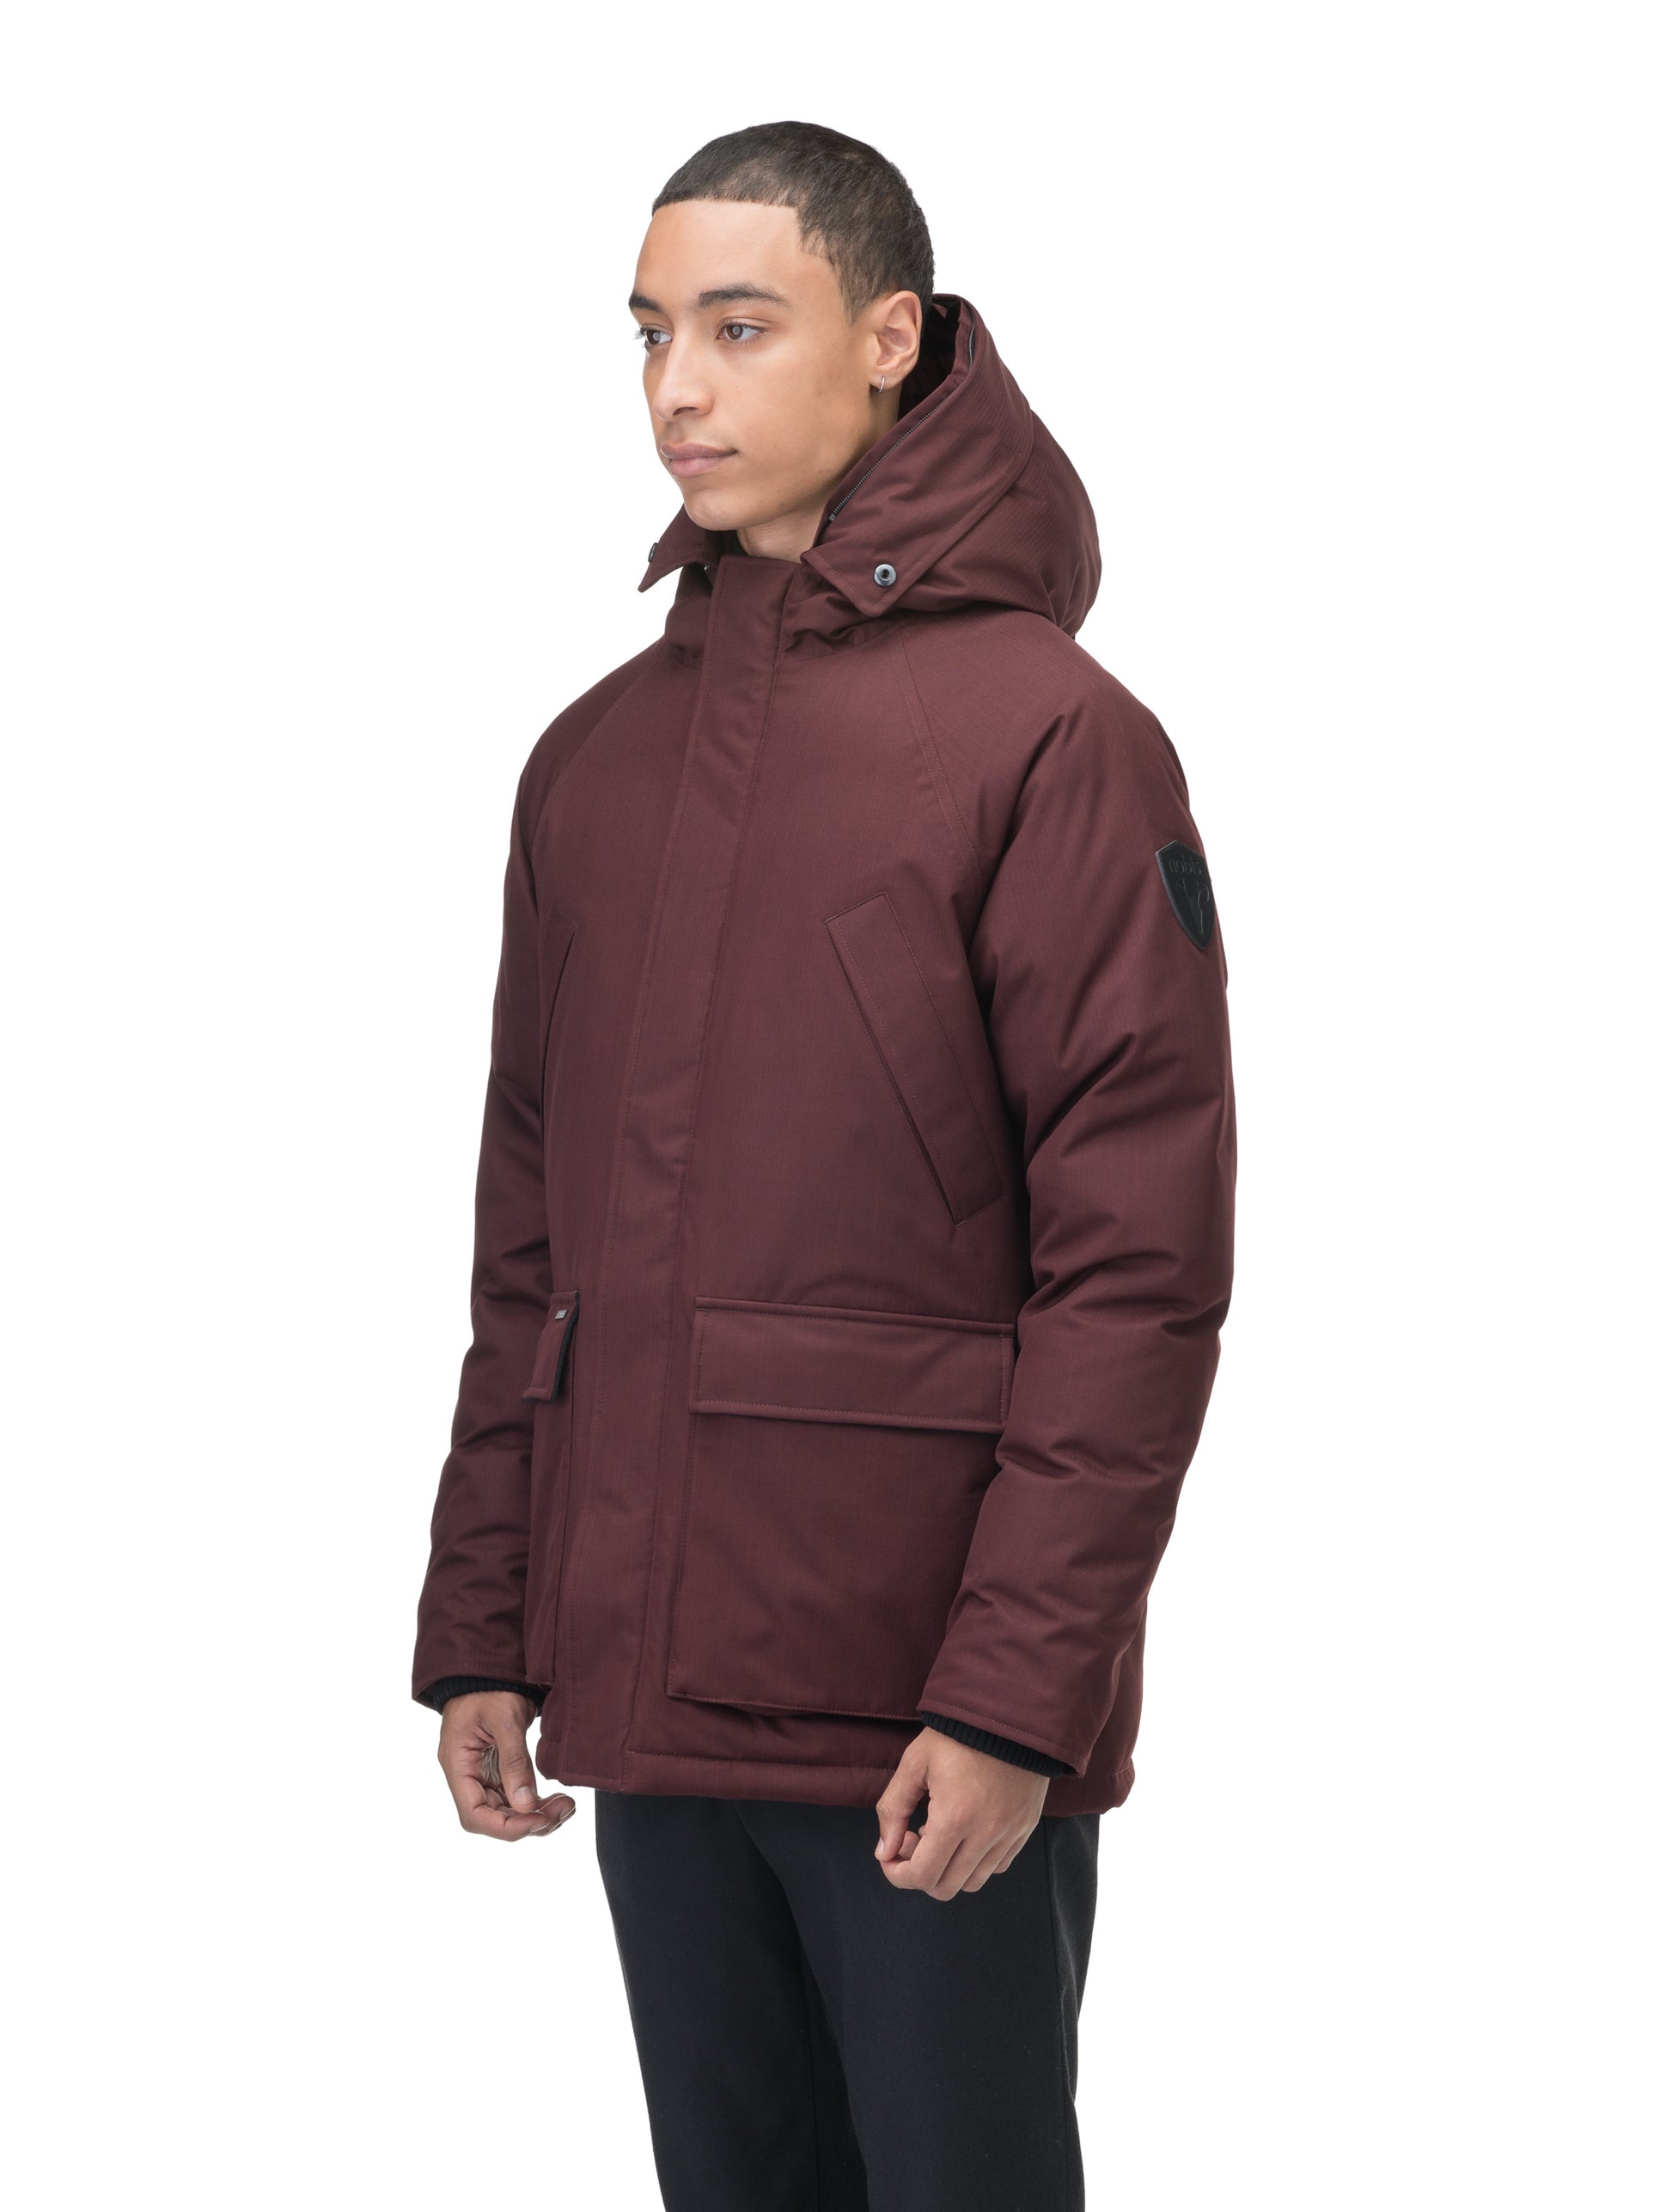 Heritage Furless Men's Parka in hip length, Canadian white duck down insulation, non-removable hood, front zipper with magnetic placket, chest hand warmer pockets, waist flap pockets, and elastic cuffs, in Merlot